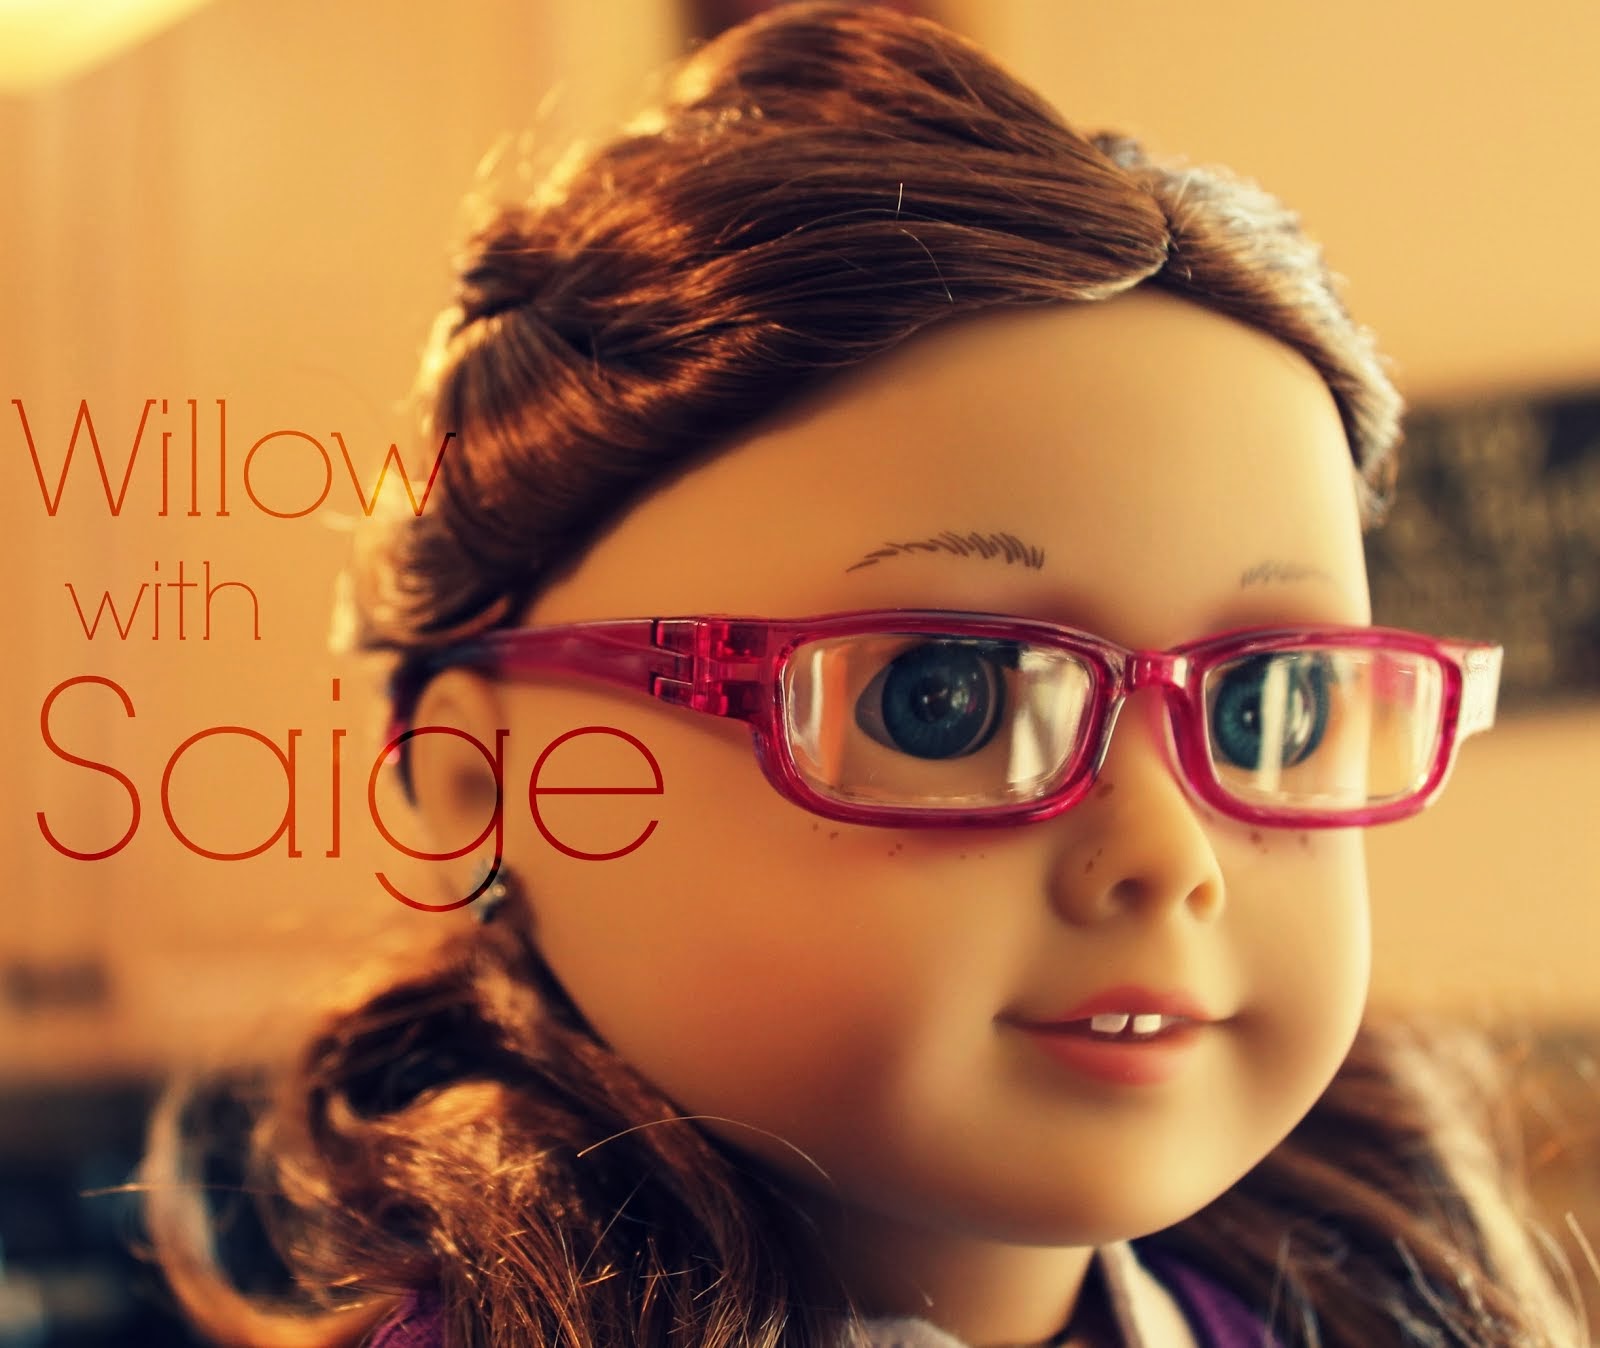 Willow with Saige